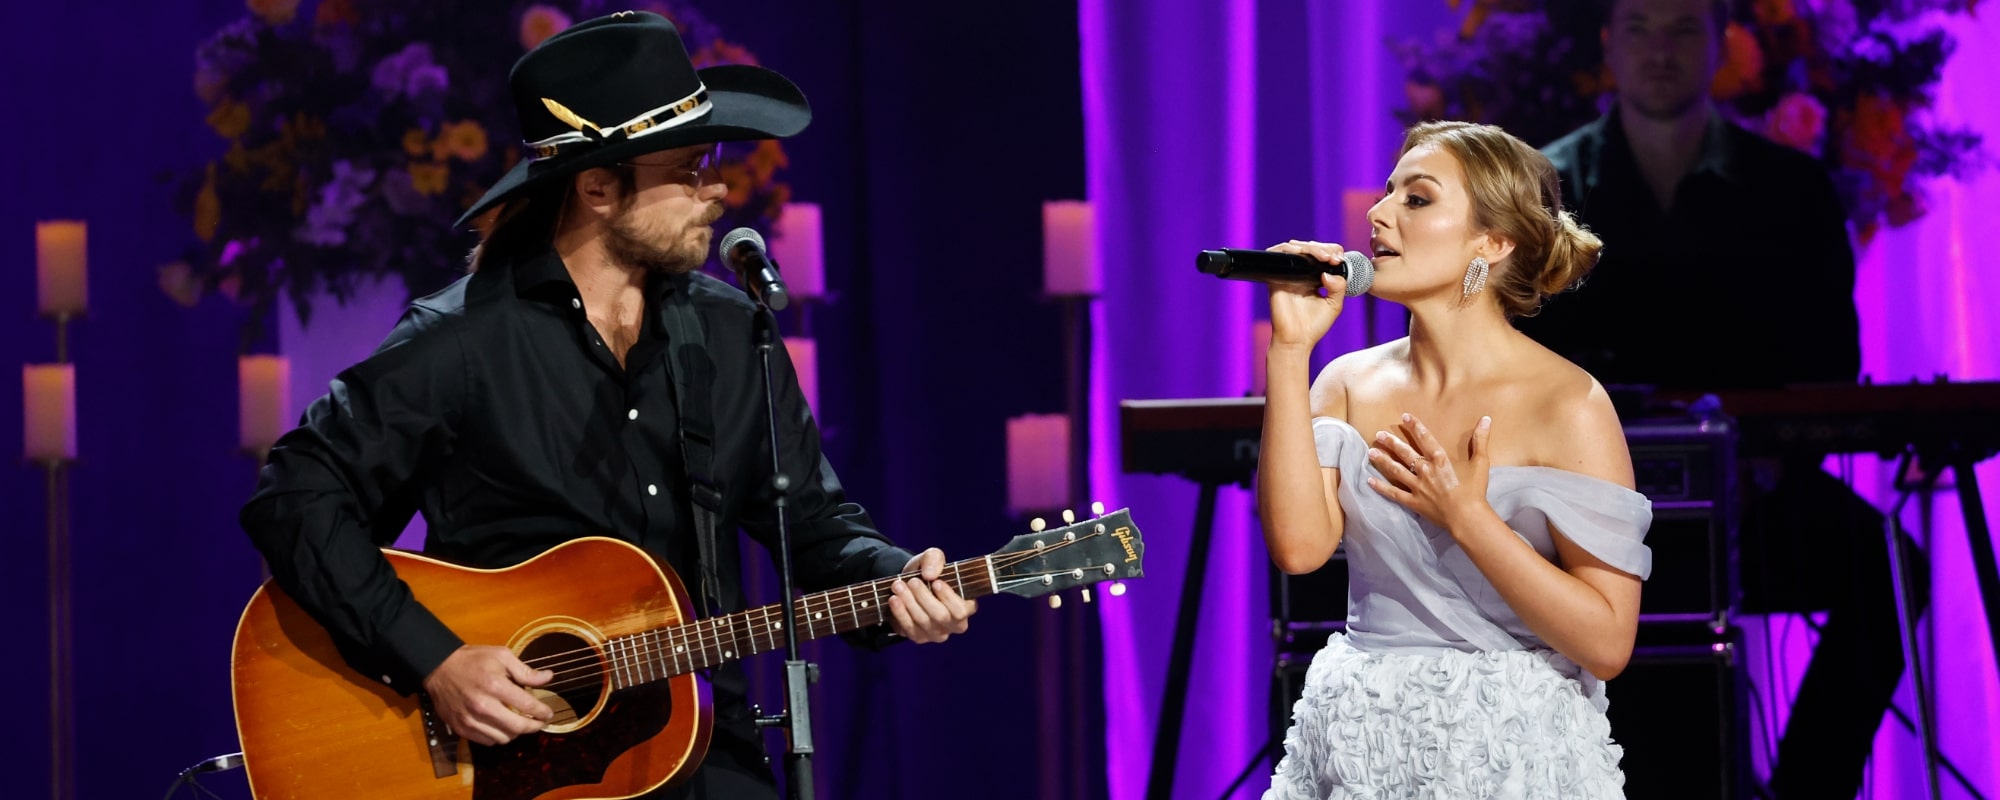 Watch ‘American Idol’ Star Emmy Russell and Willie Nelson’s Son “Make Their Legendary Relatives Proud” With Stunning Duet